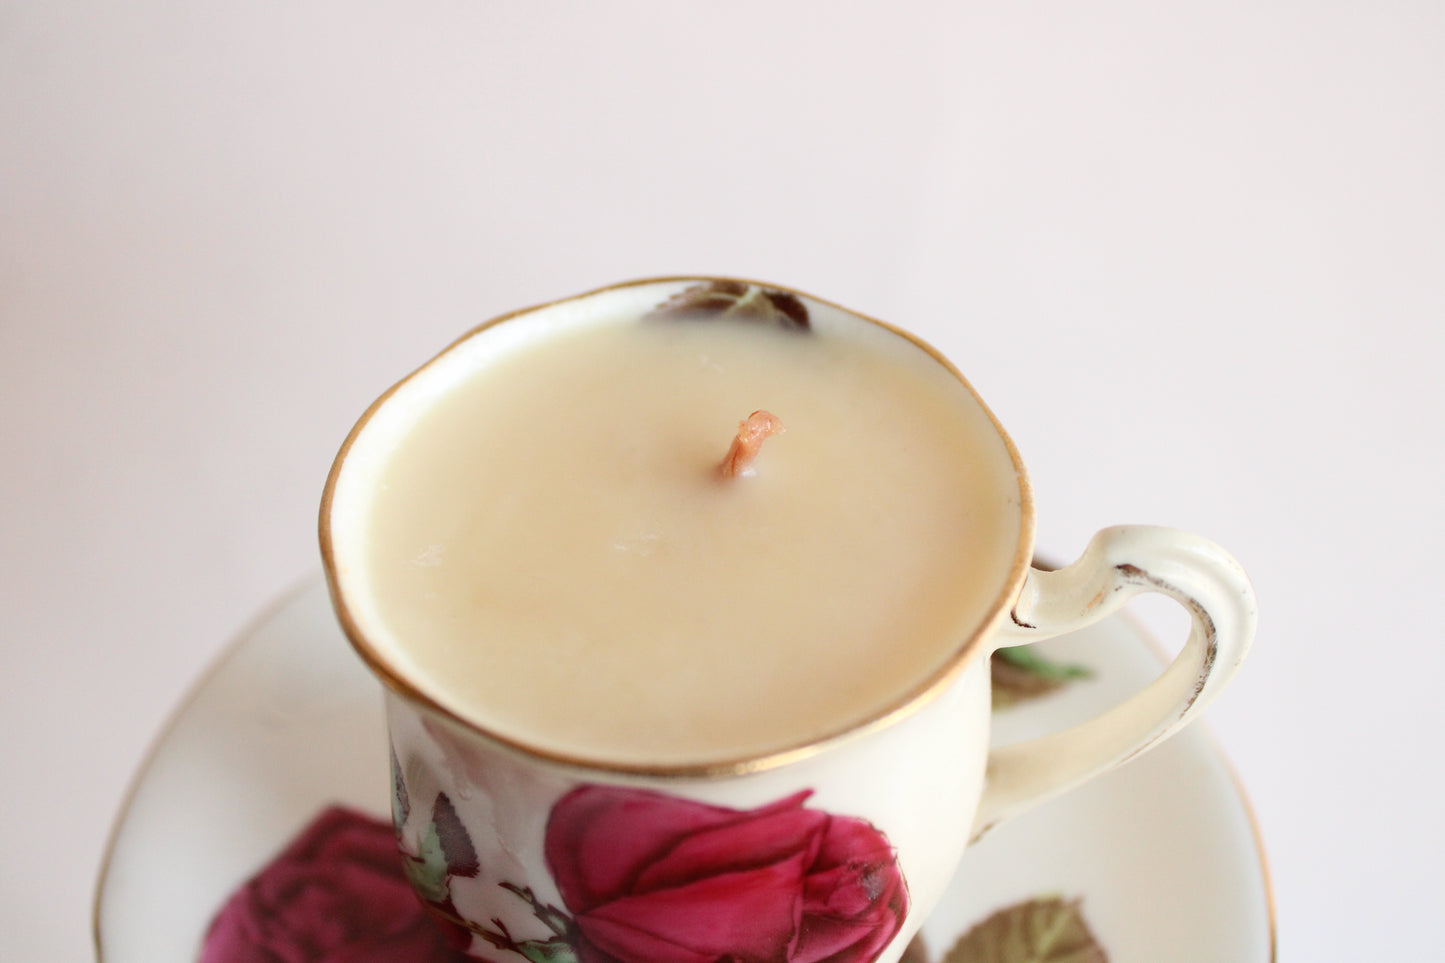 Handpoured Soy Wax Candle in A Royal Standard English Rose Tea Cup and Saucer